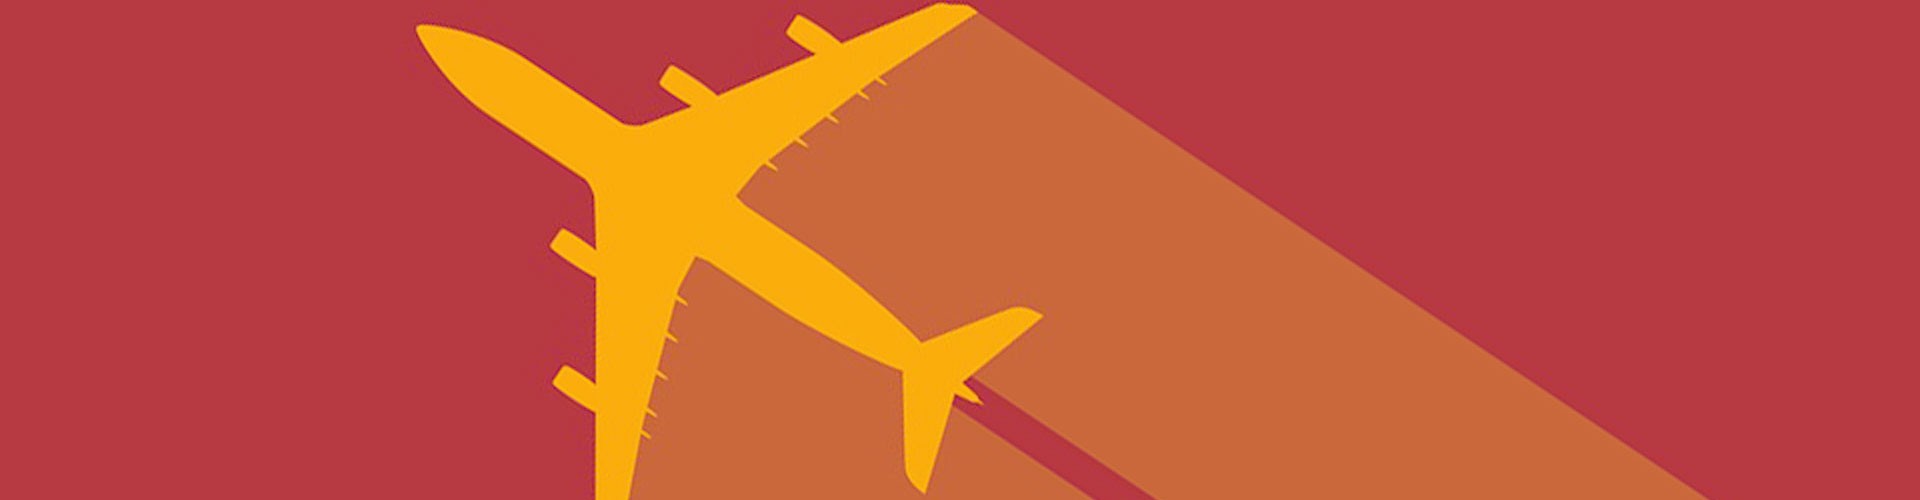 aeroplane graphic in red and orange